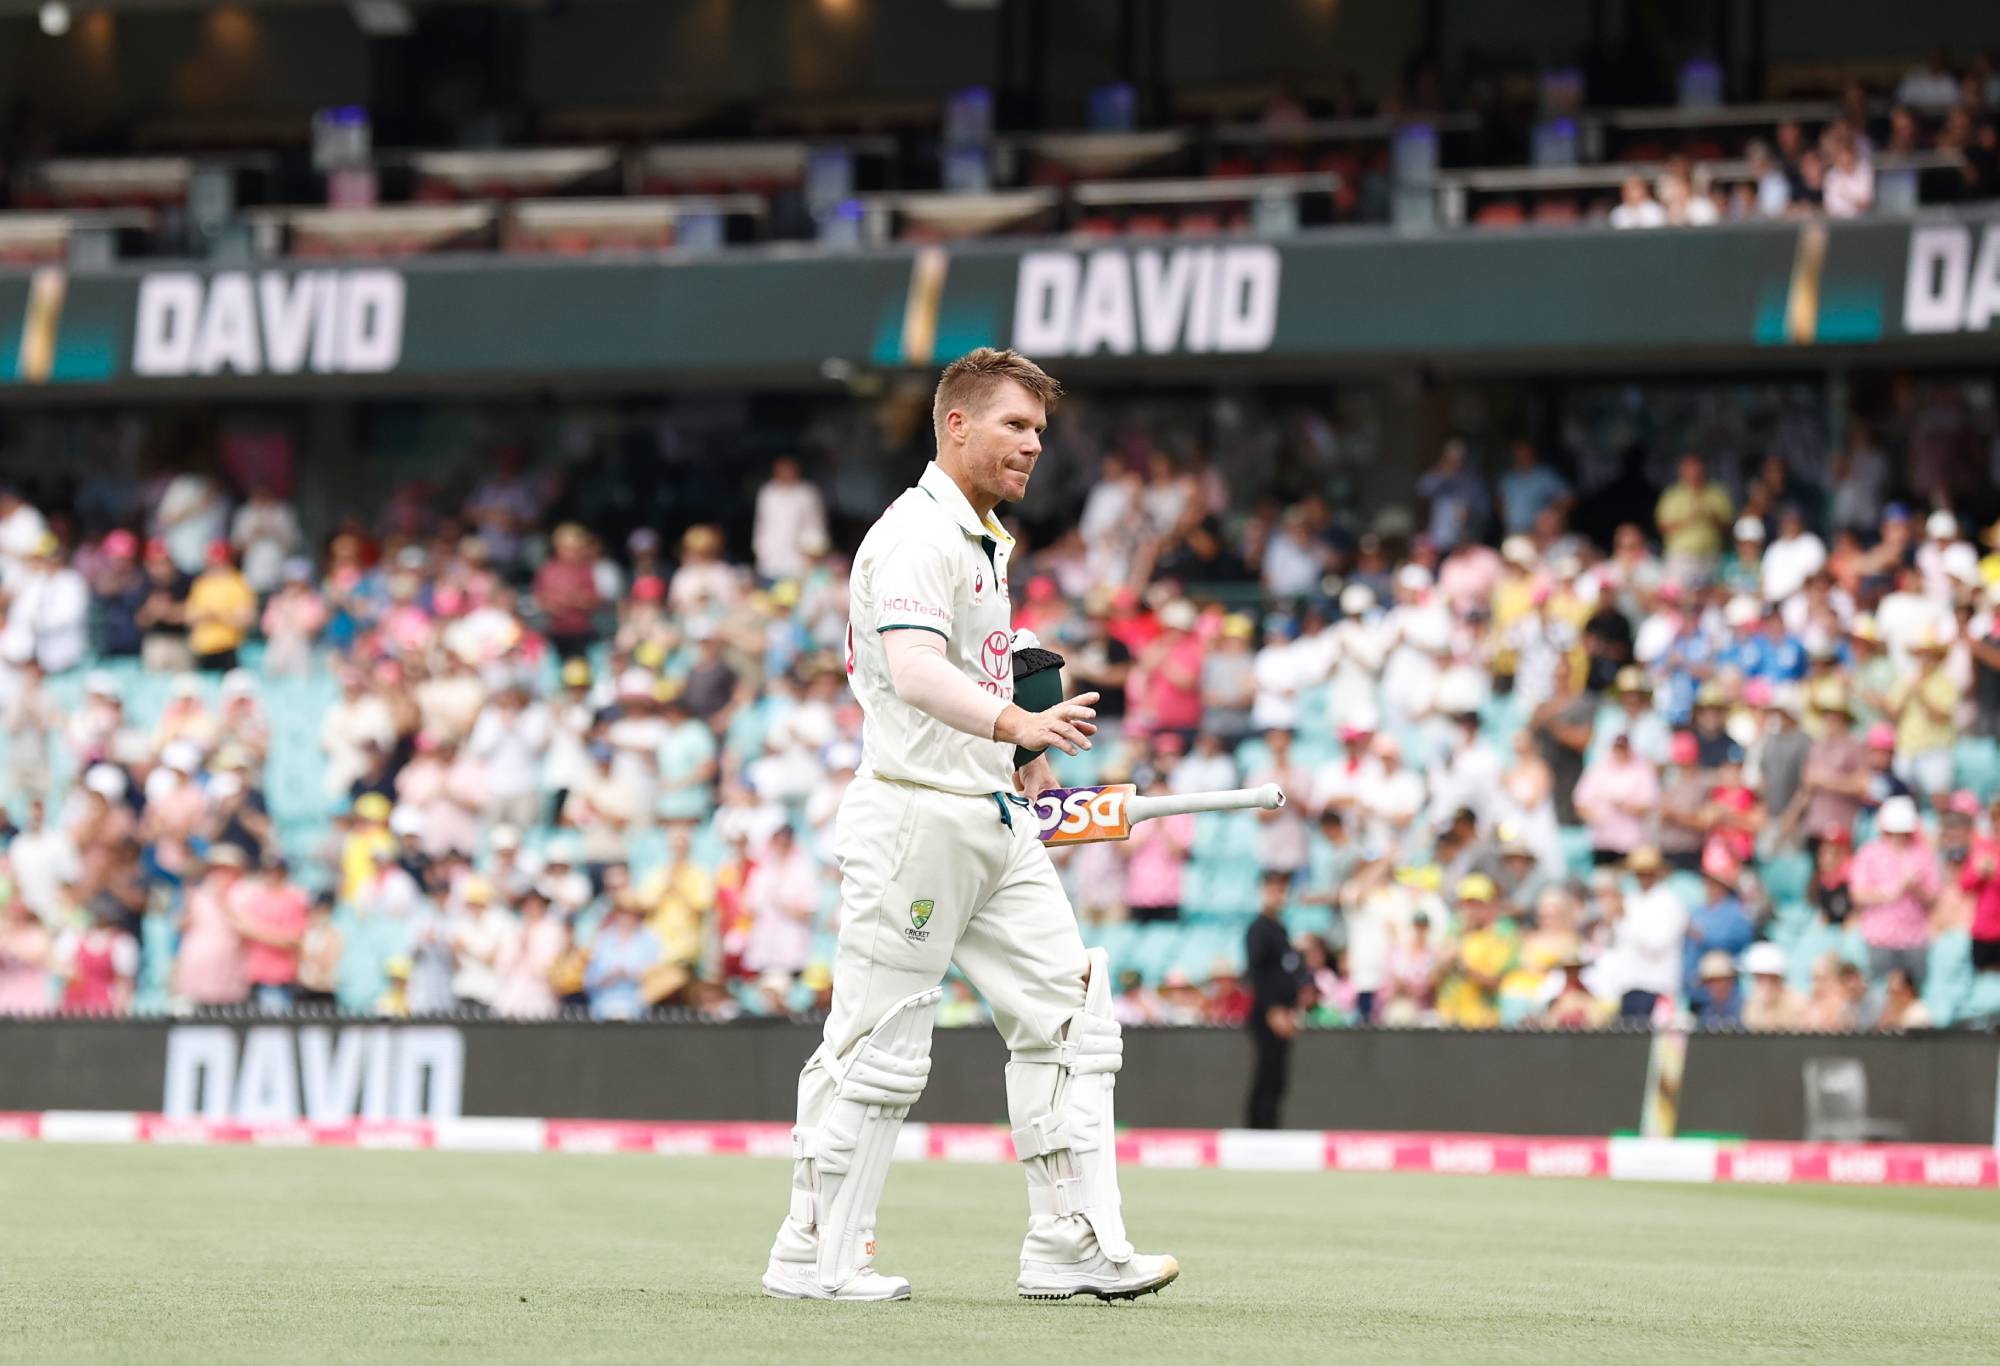 SYDNEY, AUSTRALIA - JANUARY 04: David Warner of Australia walks off the field after being dismissed by Agha Salman of Pakistan during day two of the Men's Third Test Match in the series between Australia and Pakistan at Sydney Cricket Ground on January 04, 2024 in Sydney, Australia. (Photo by Darrian Traynor/Getty Images)